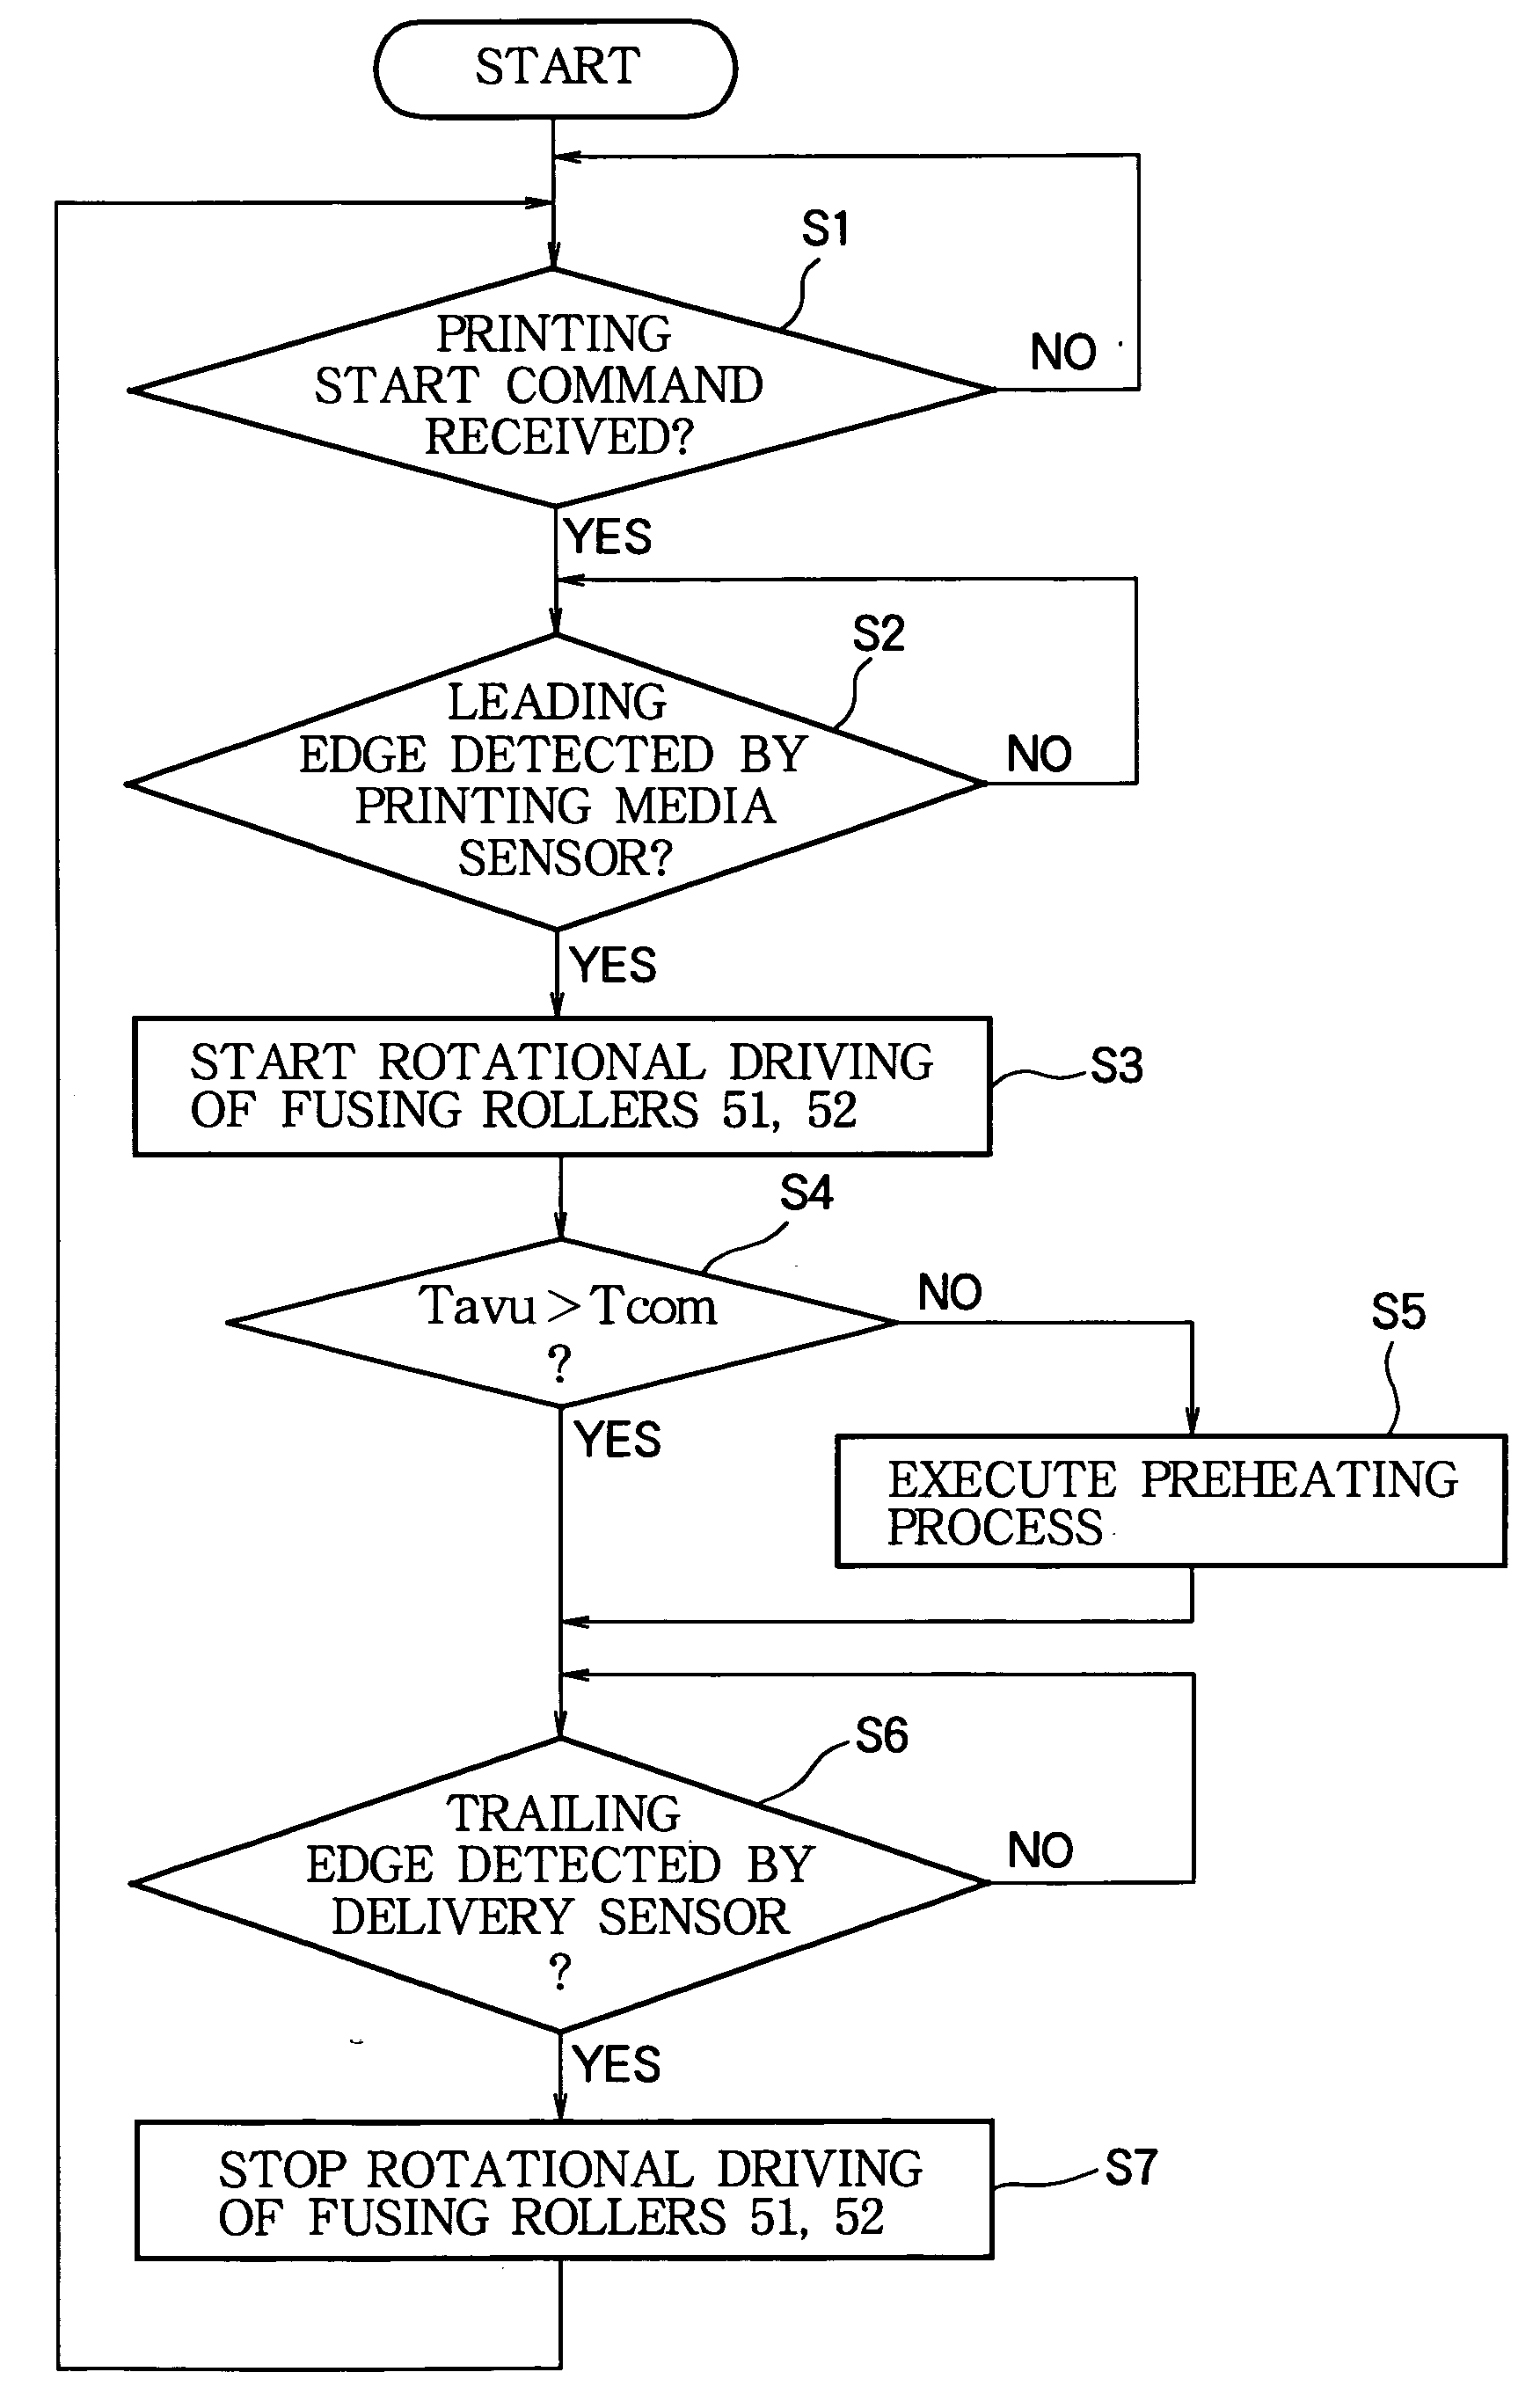 Image processing apparatus with preheating control